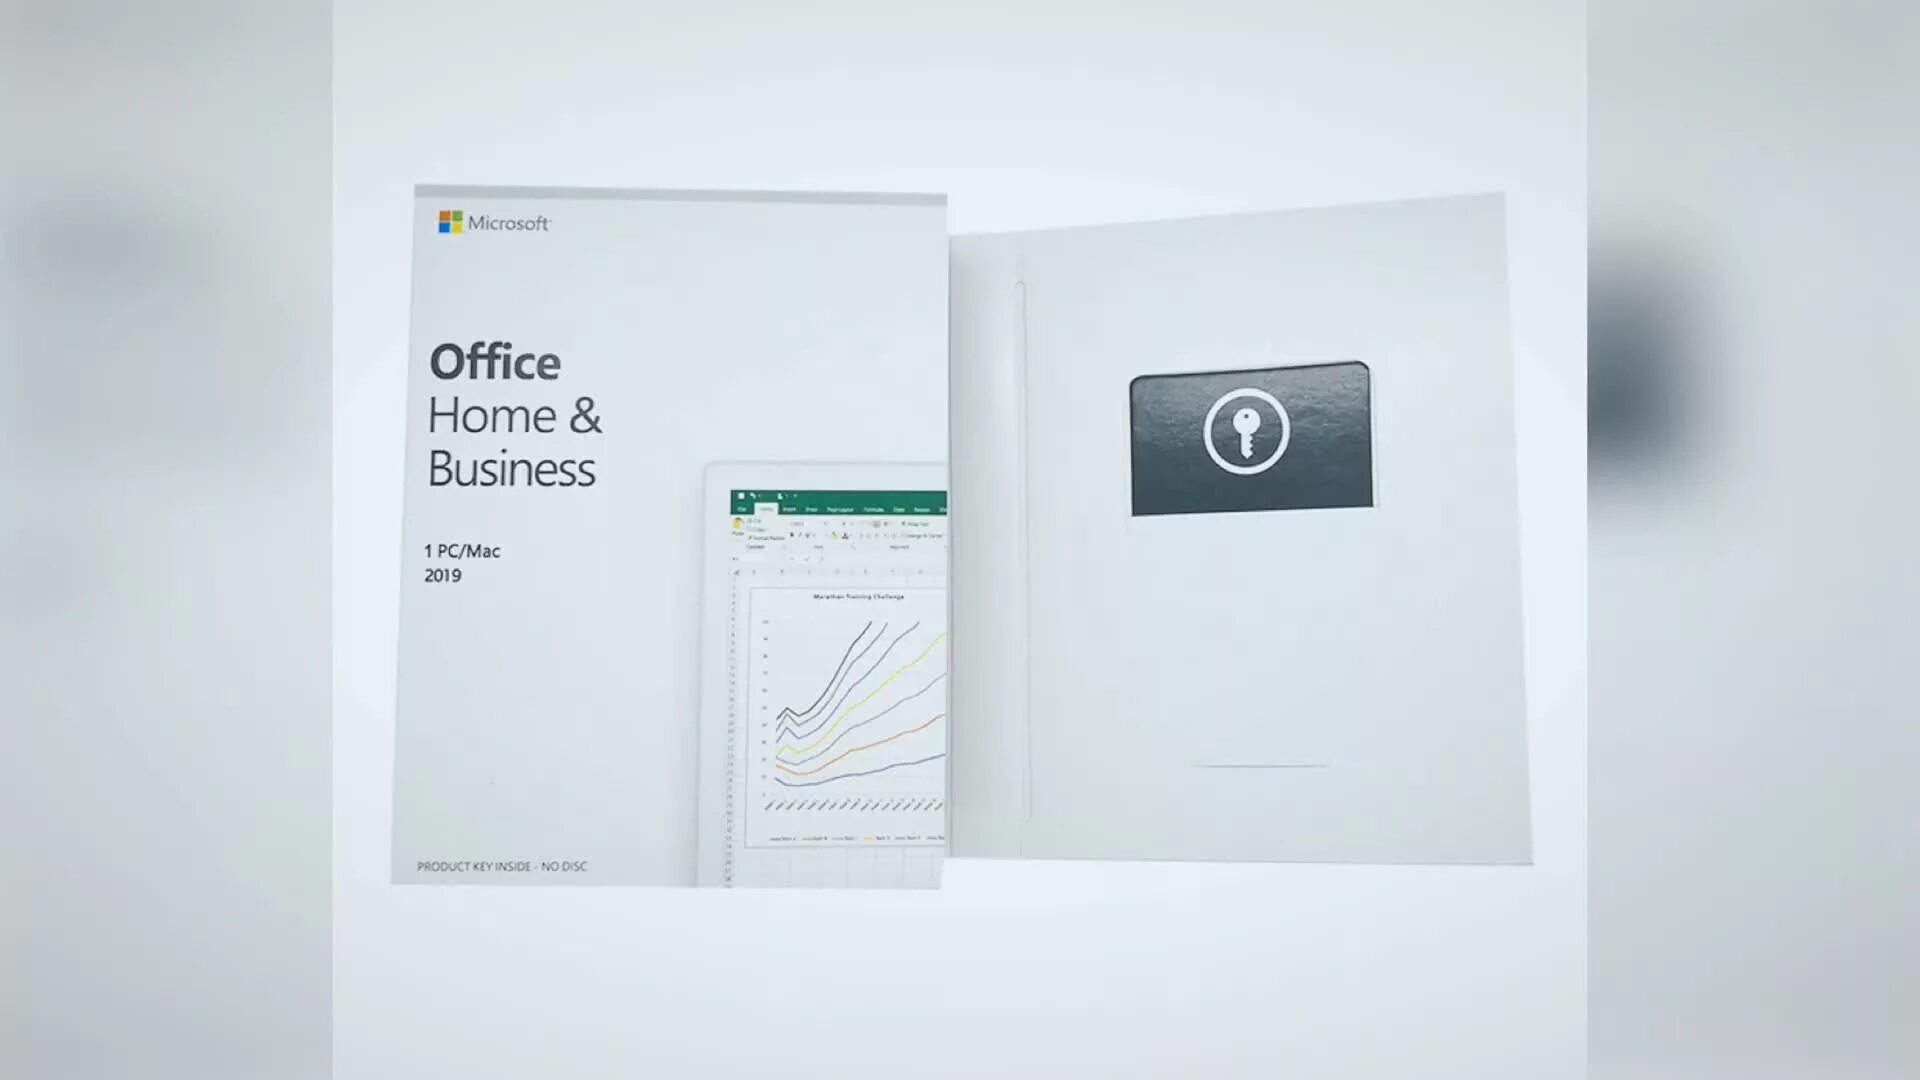 2021 Home and Business Mac. Office 2019. Microsoft Office Key. Офис 2019 Pro Plus.